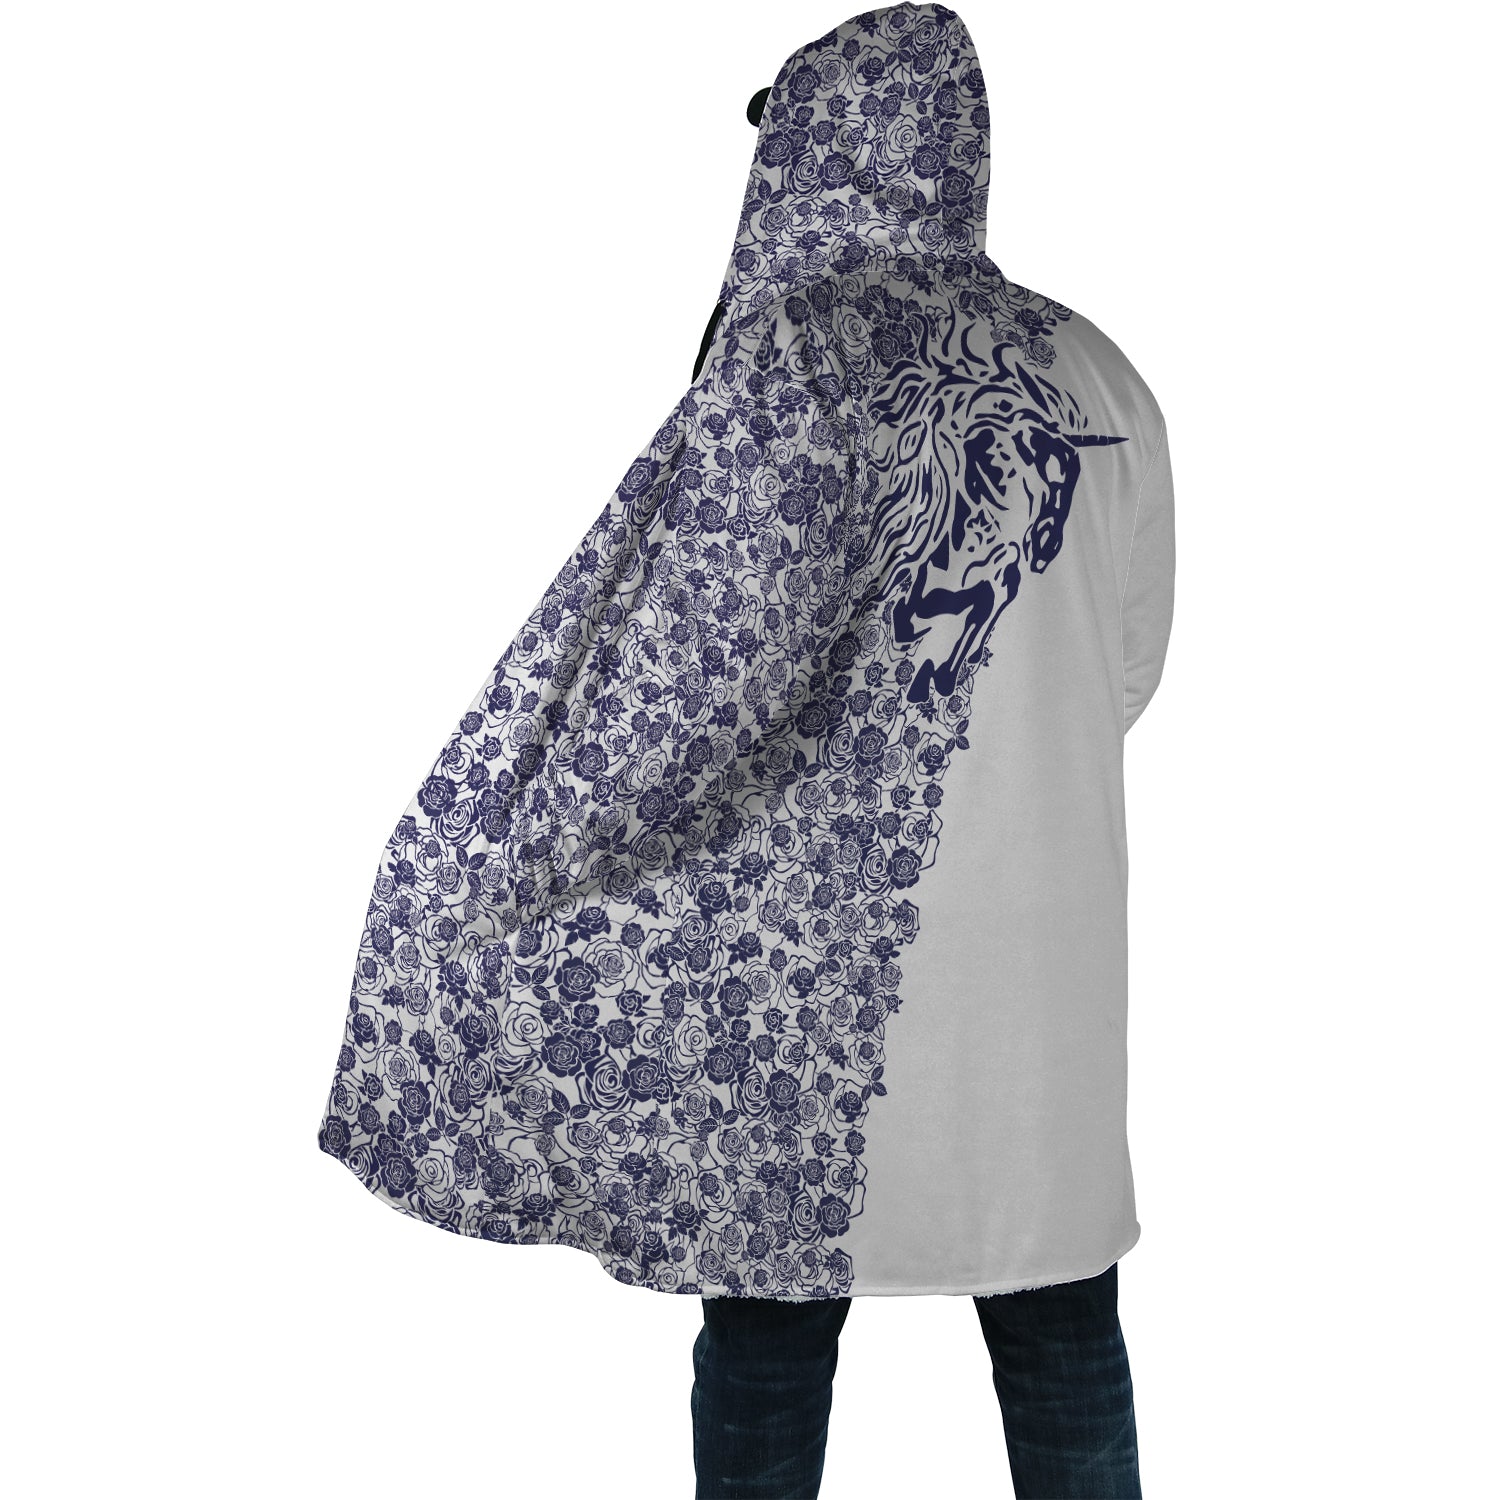 Lee's Excellent Hooded Coat with Unicorn - Cobalt Roses [with Bag]